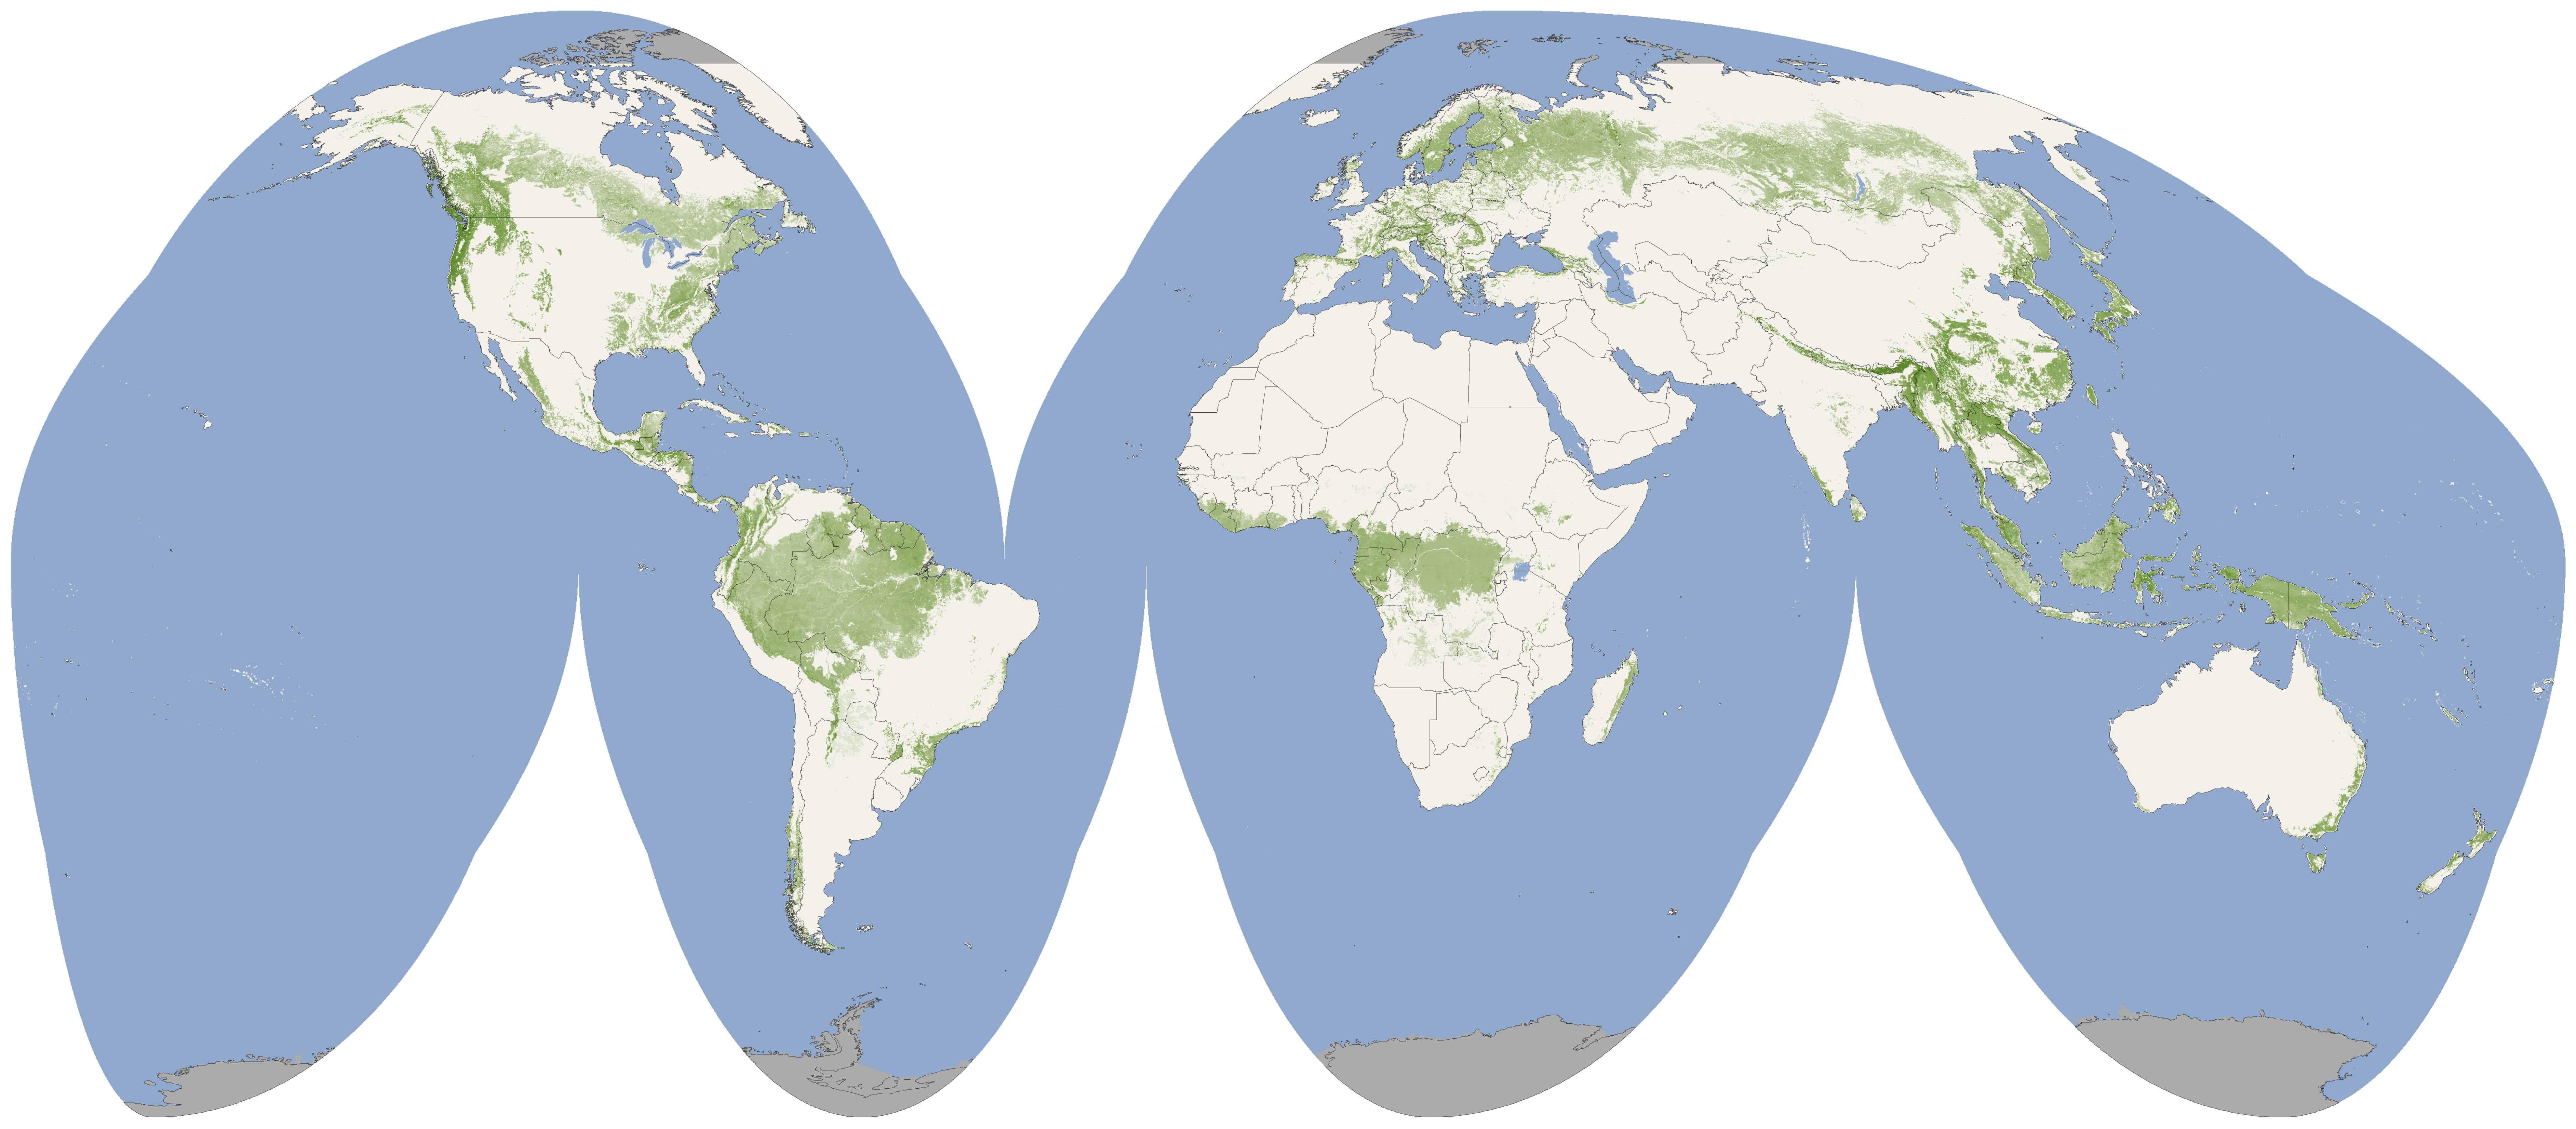 World forest cover. Image credits: NASA Earth Observatory